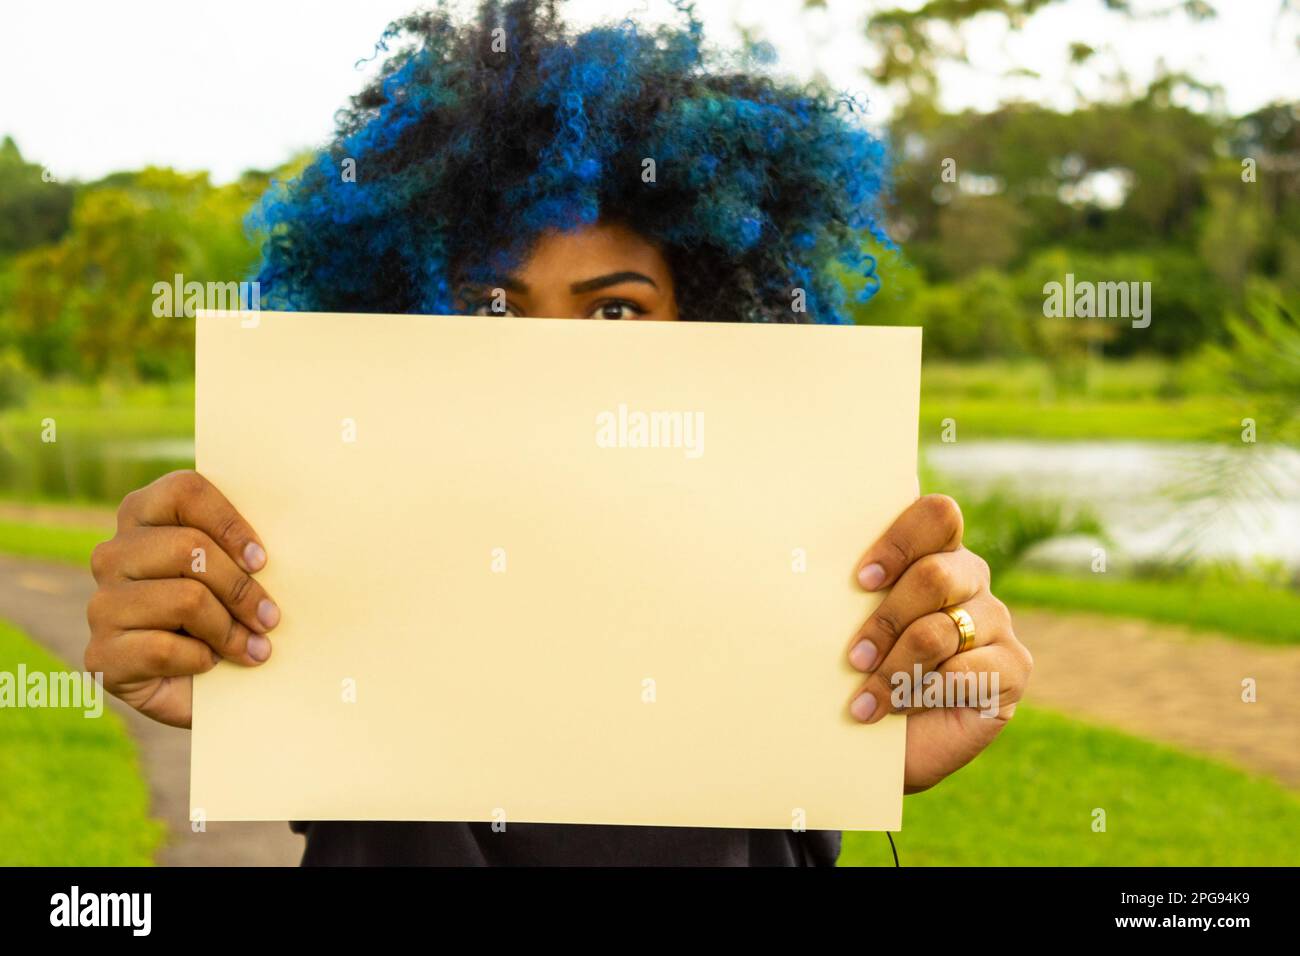 Goiania, Goias, Brazil – March 21, 2023: A young woman, with hair dyed blue, her face hidden behind a blank poster, with a landscape in the background Stock Photo